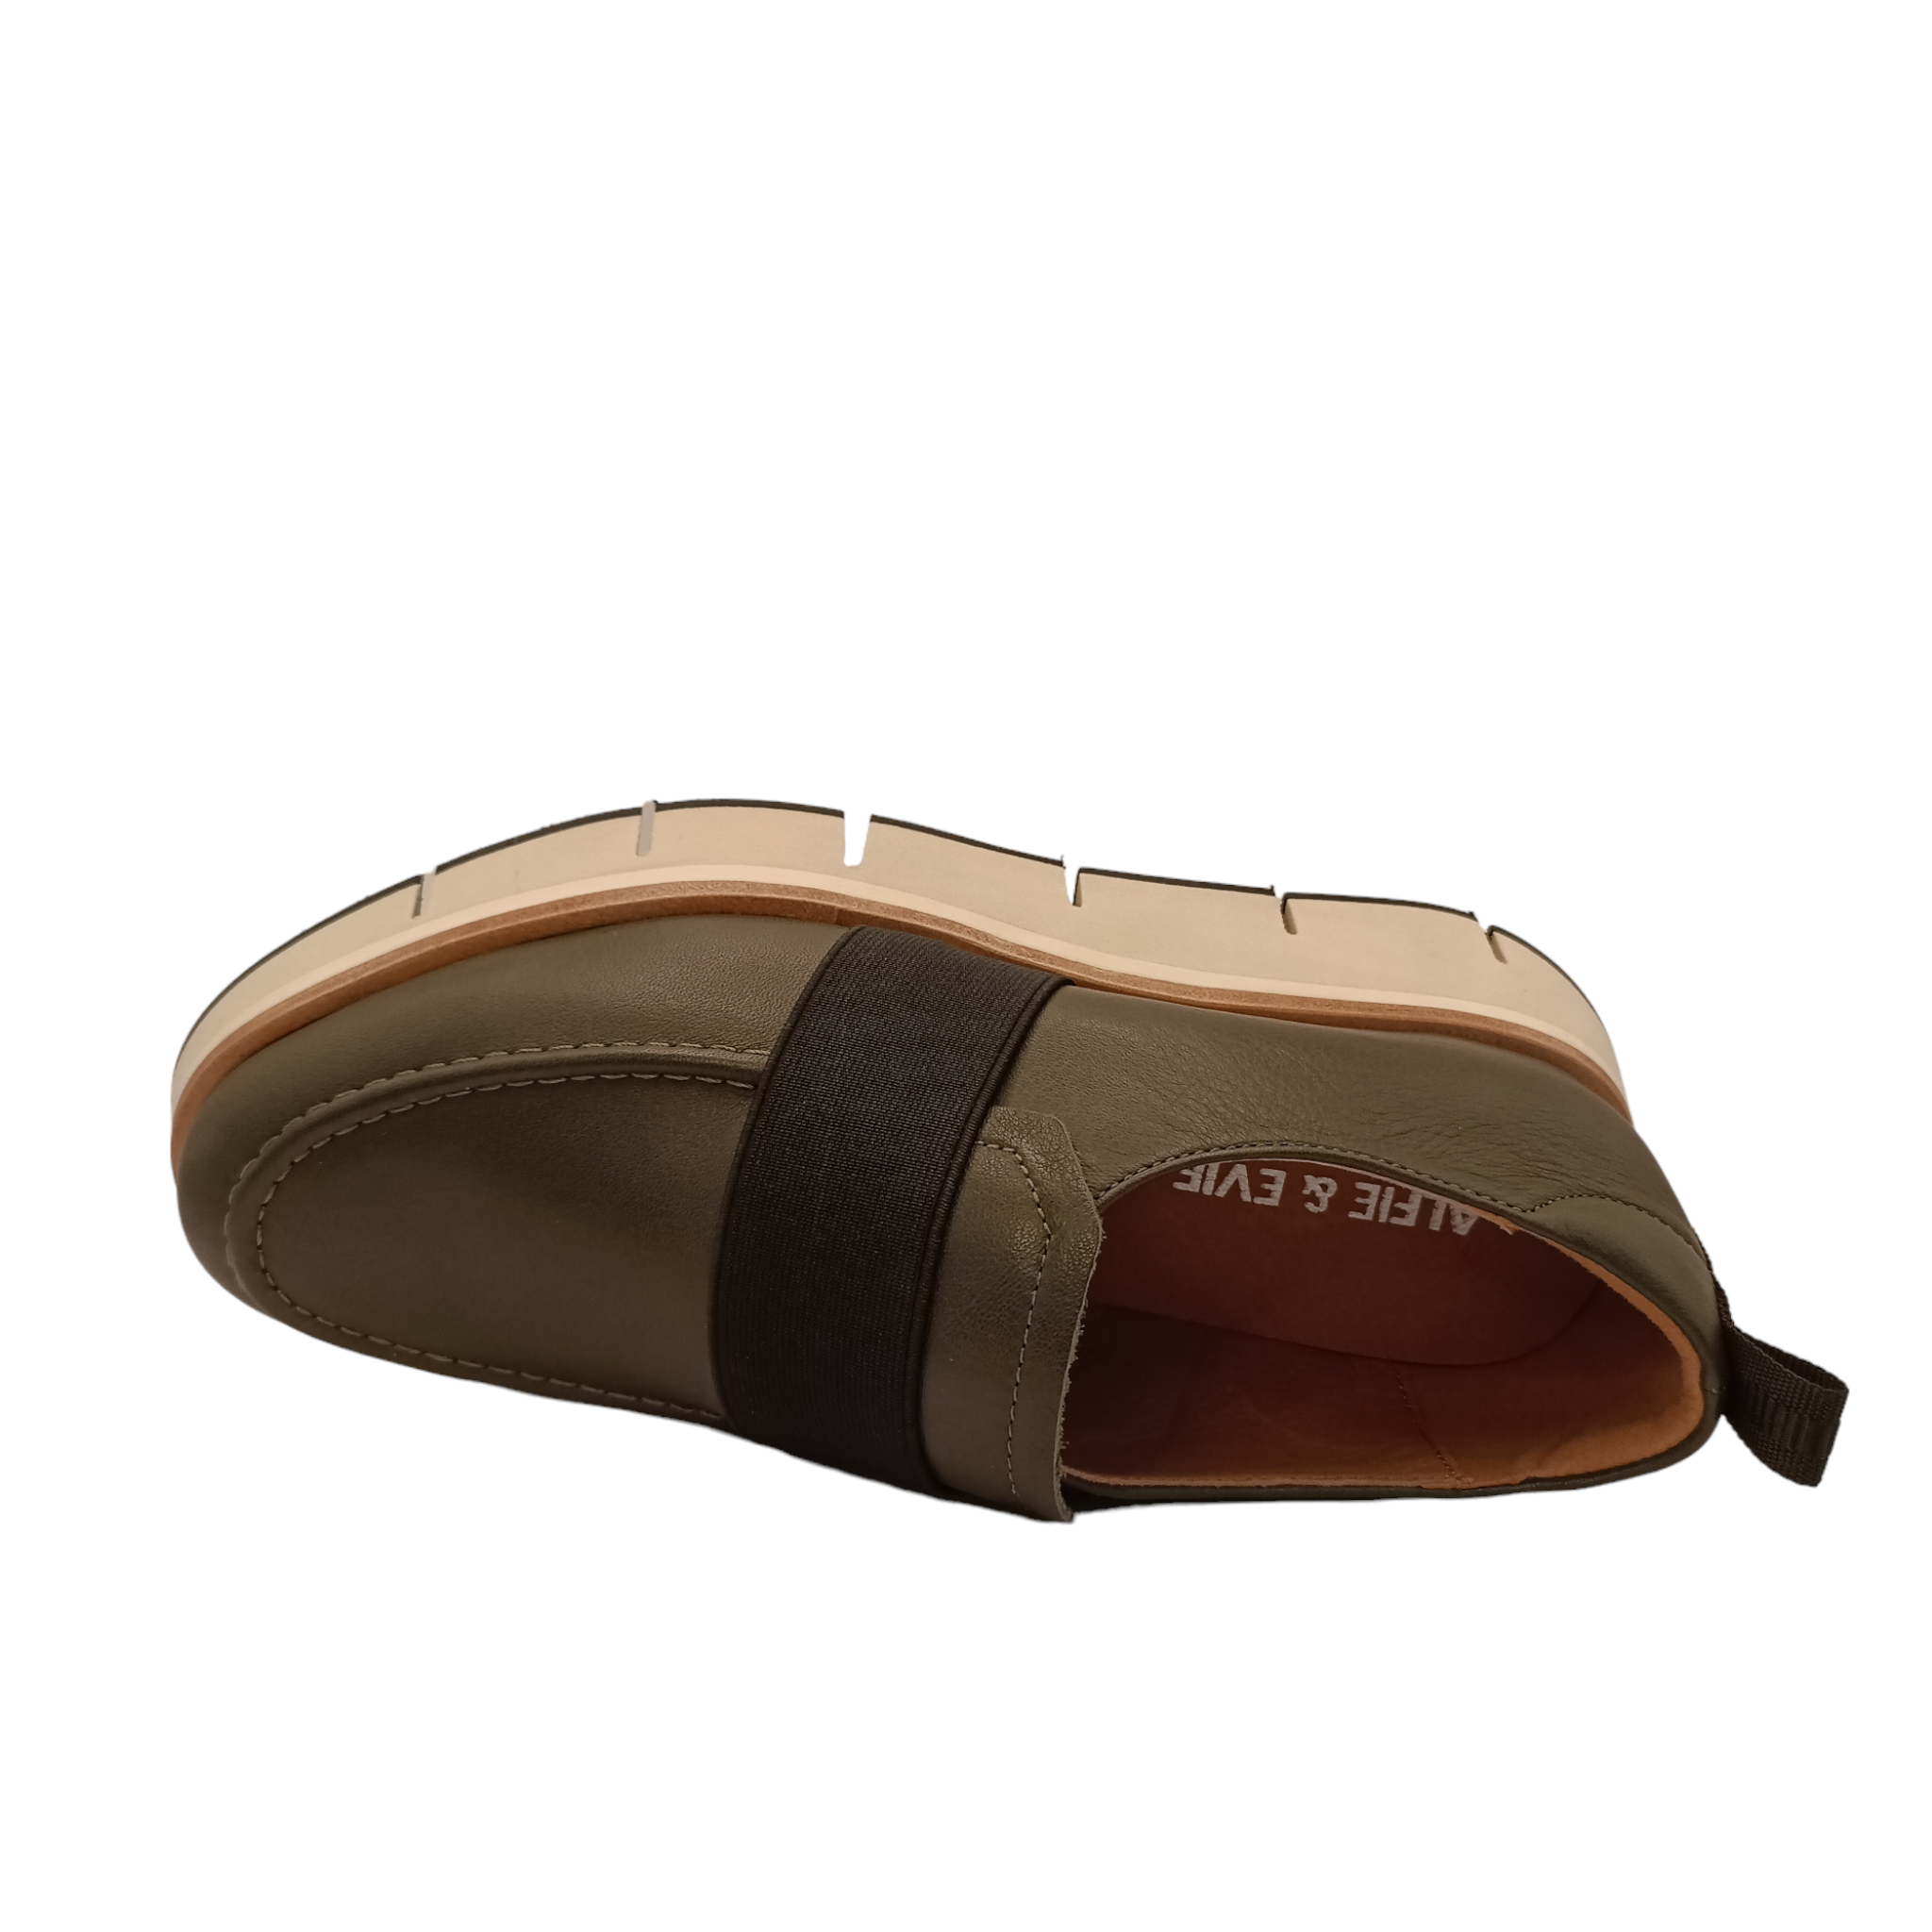 Shop Batty - with shoe&me - from Alfie & Evie - Shoes - Shoe, Winter, Womens